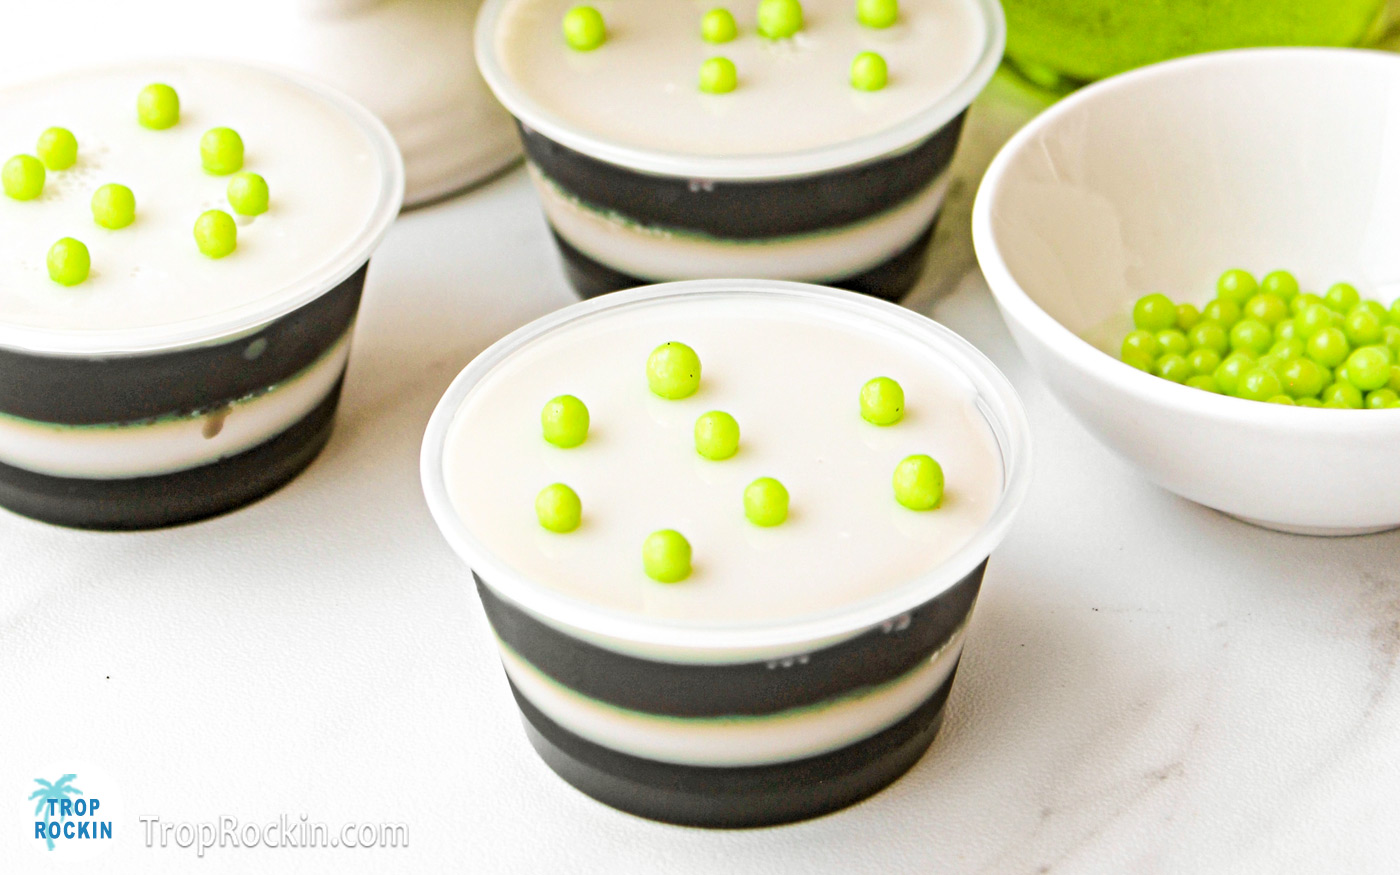 Black and white striped jello shots with lime green sprinkles on top to represent Beetlejuice.